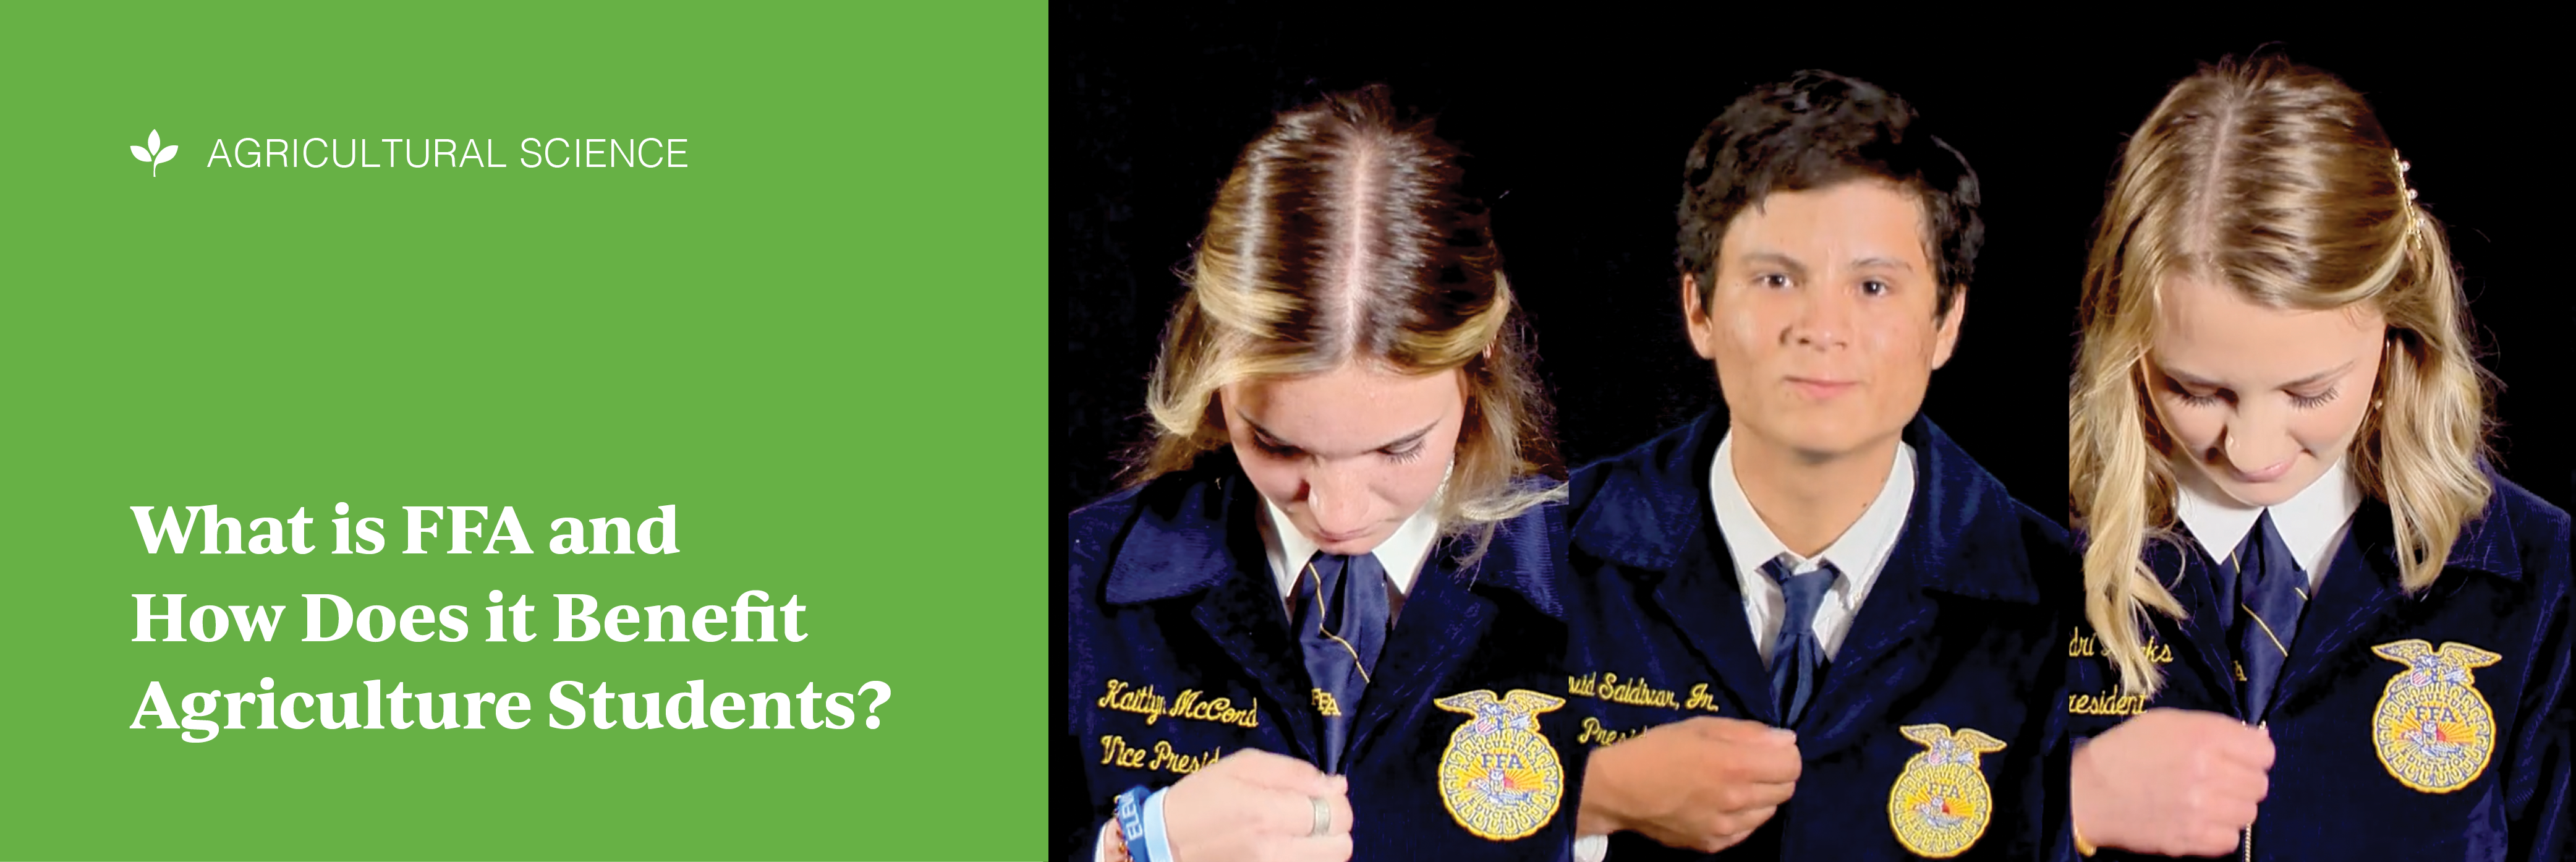 What Is FFA and How Does It Benefit Agriculture Students?